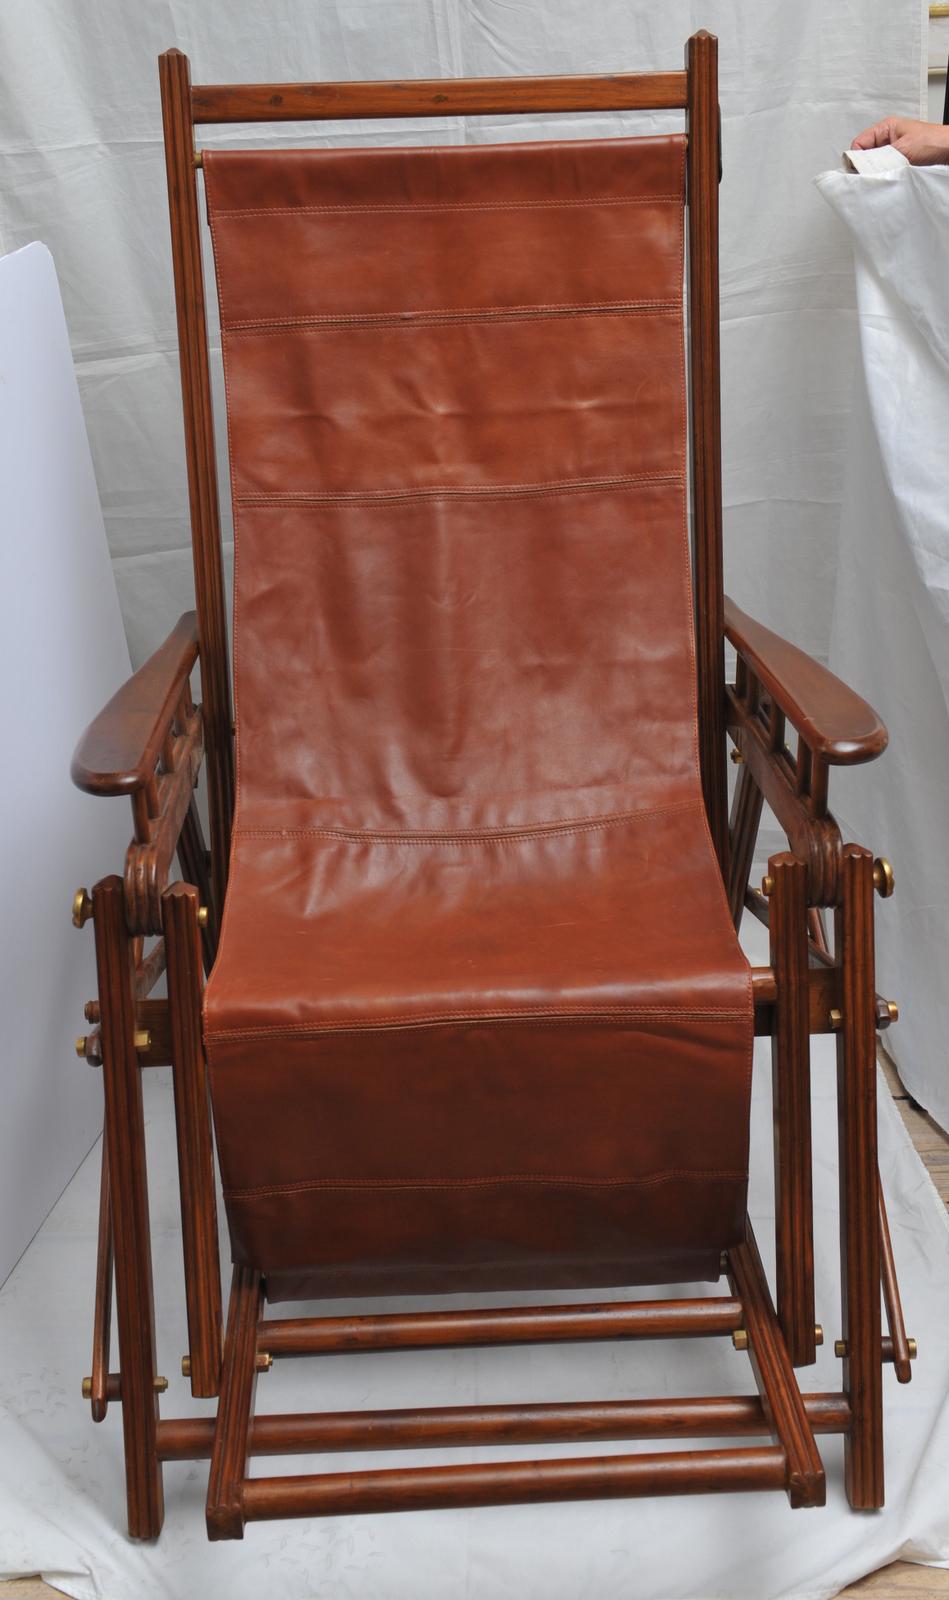 From the early 1900s, a British Campaign safari chair with cognac leather seat. It folds, it reclines and has a canvas option to switch out for cooler weather, which is included. A simple dowel above and below holds the fabric in place and can